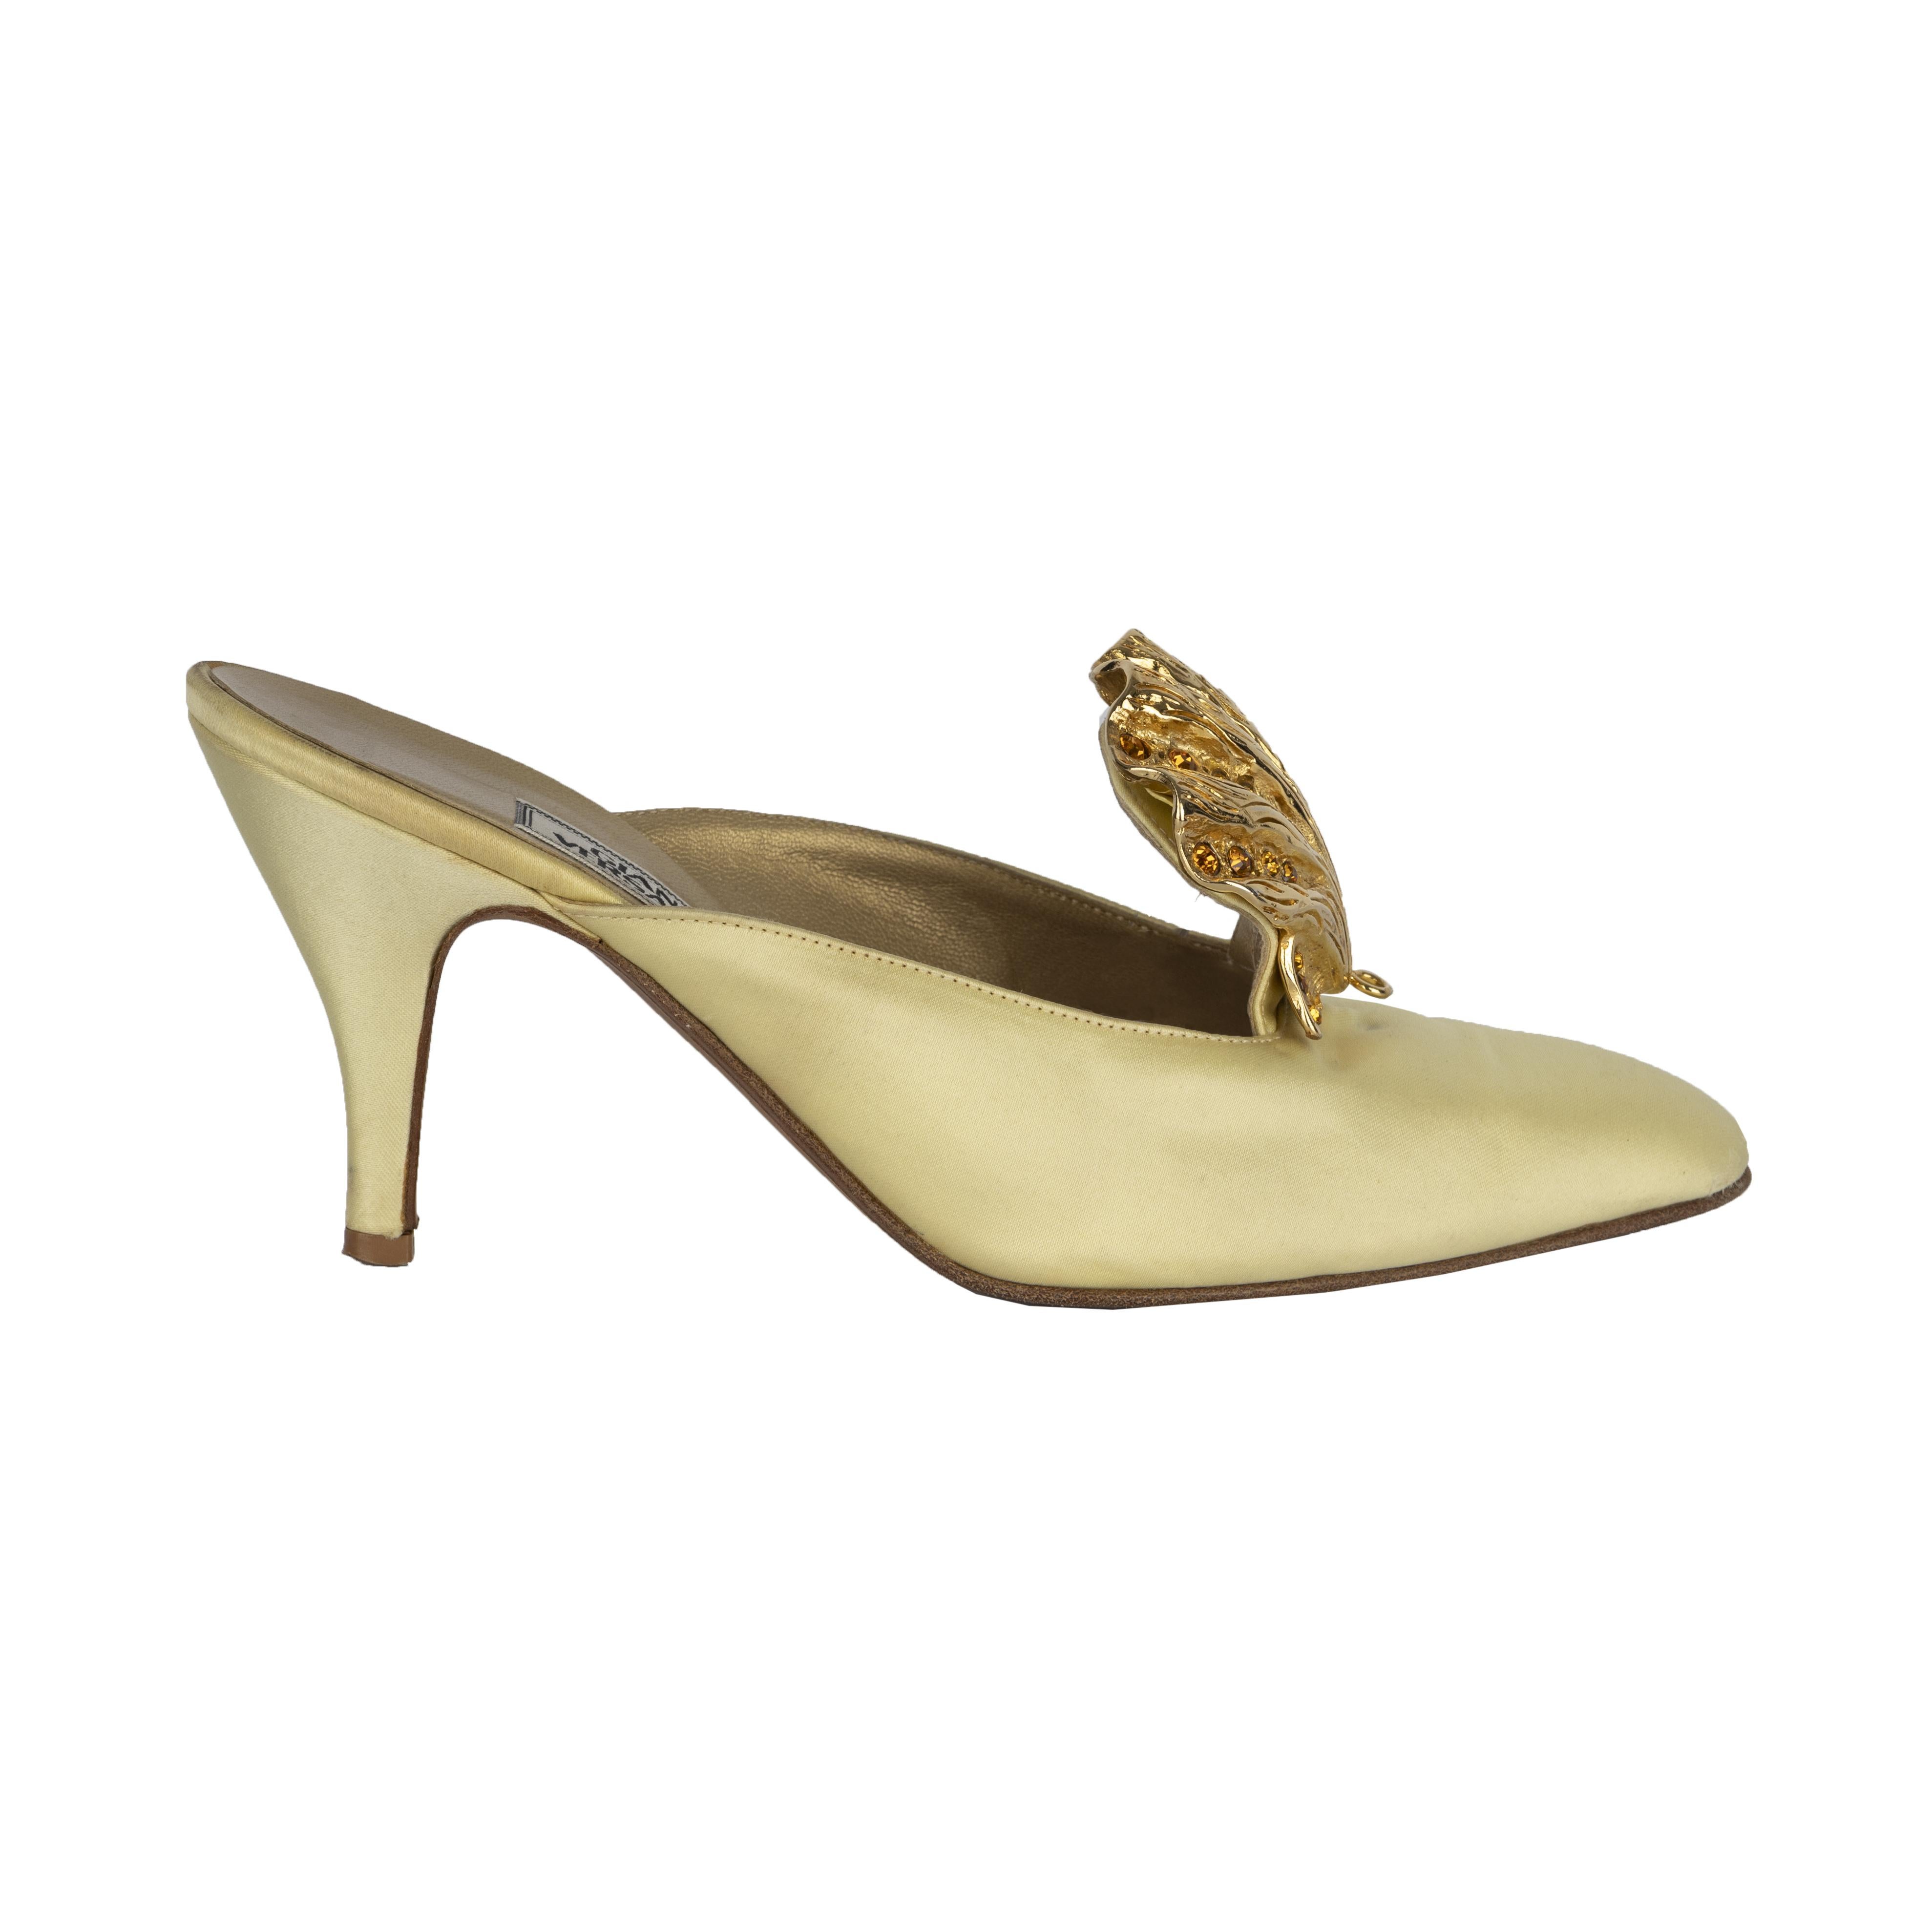 These rare, vintage Gianni Versace Gold Crystal Shell Heels date back to Versace's Spring 1992 collection. Worn by the iconic supermodel Naomi Campbell on ramp, this pair is perfect for elevating your evening ensembles and giving it a touch of